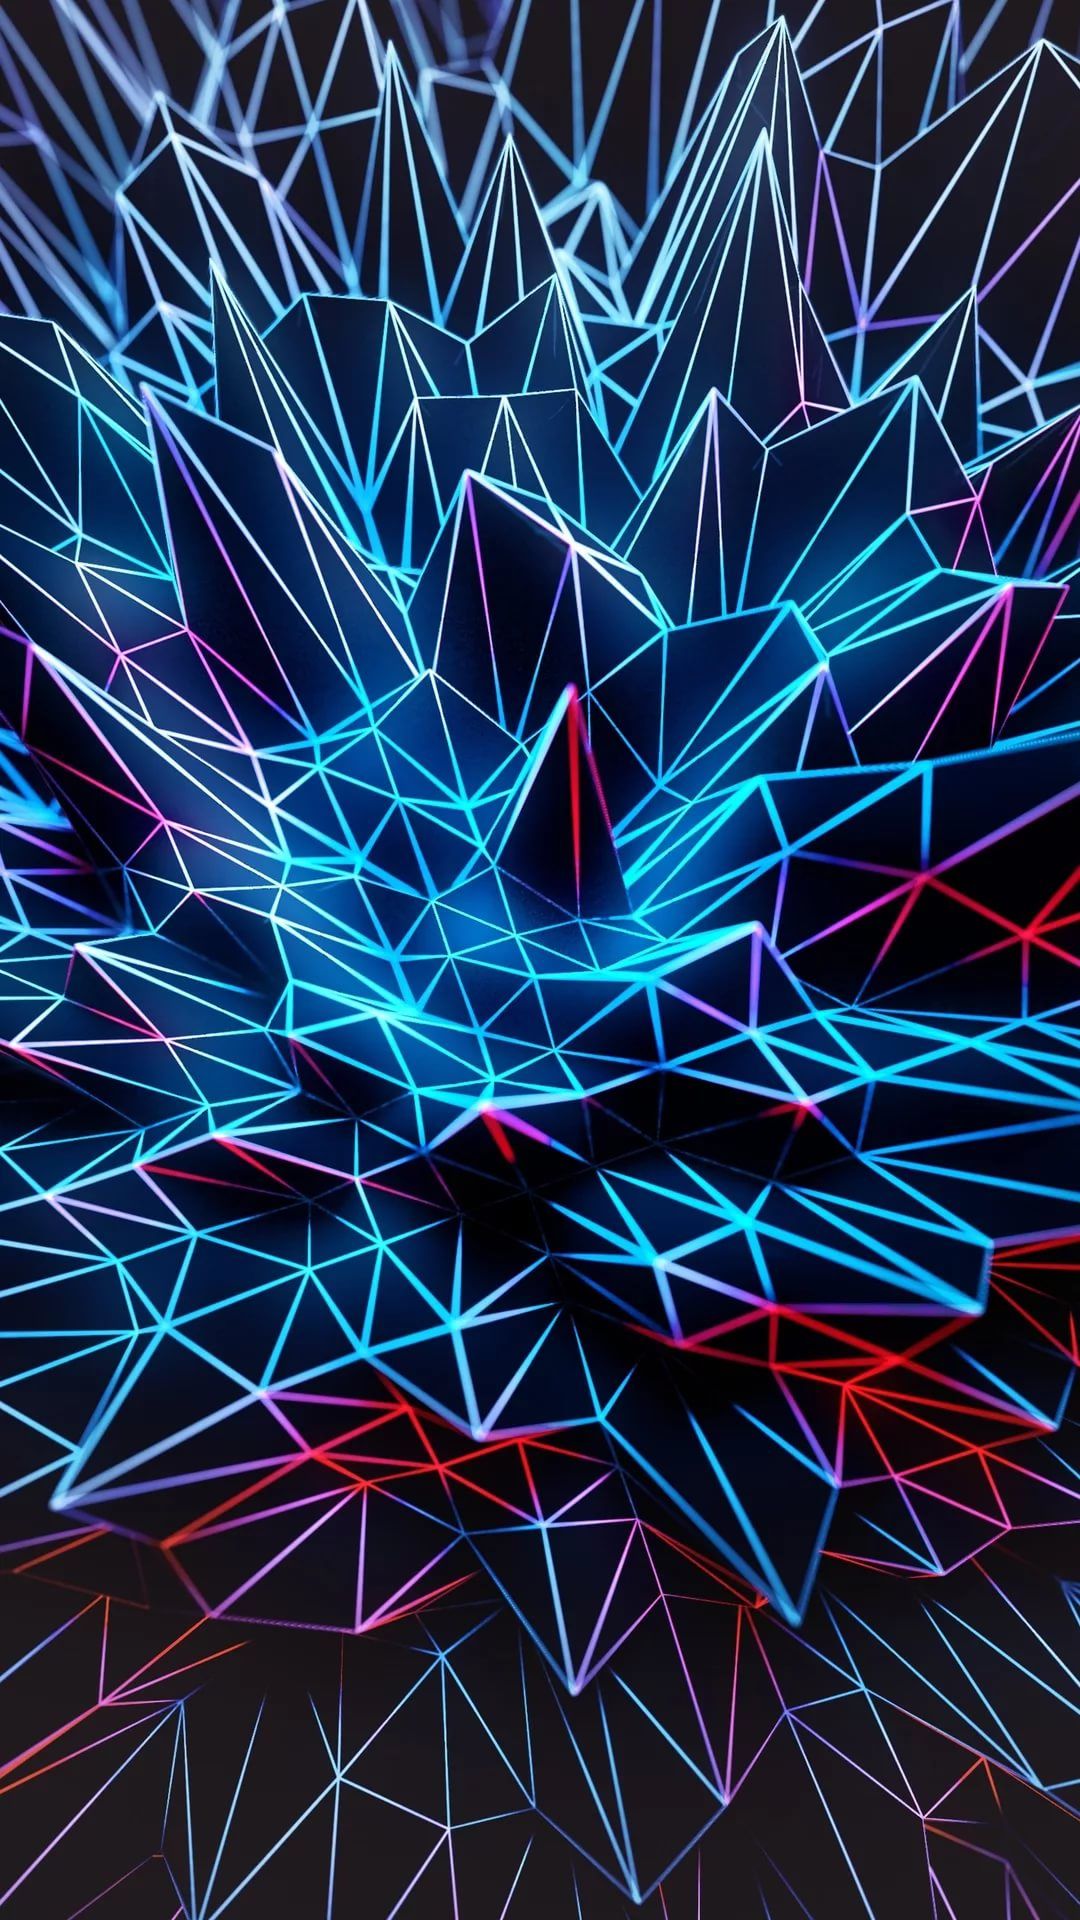 Abstract Iphone Wallpapers Iphone13 スマホ壁紙 待受画像ギャラリー